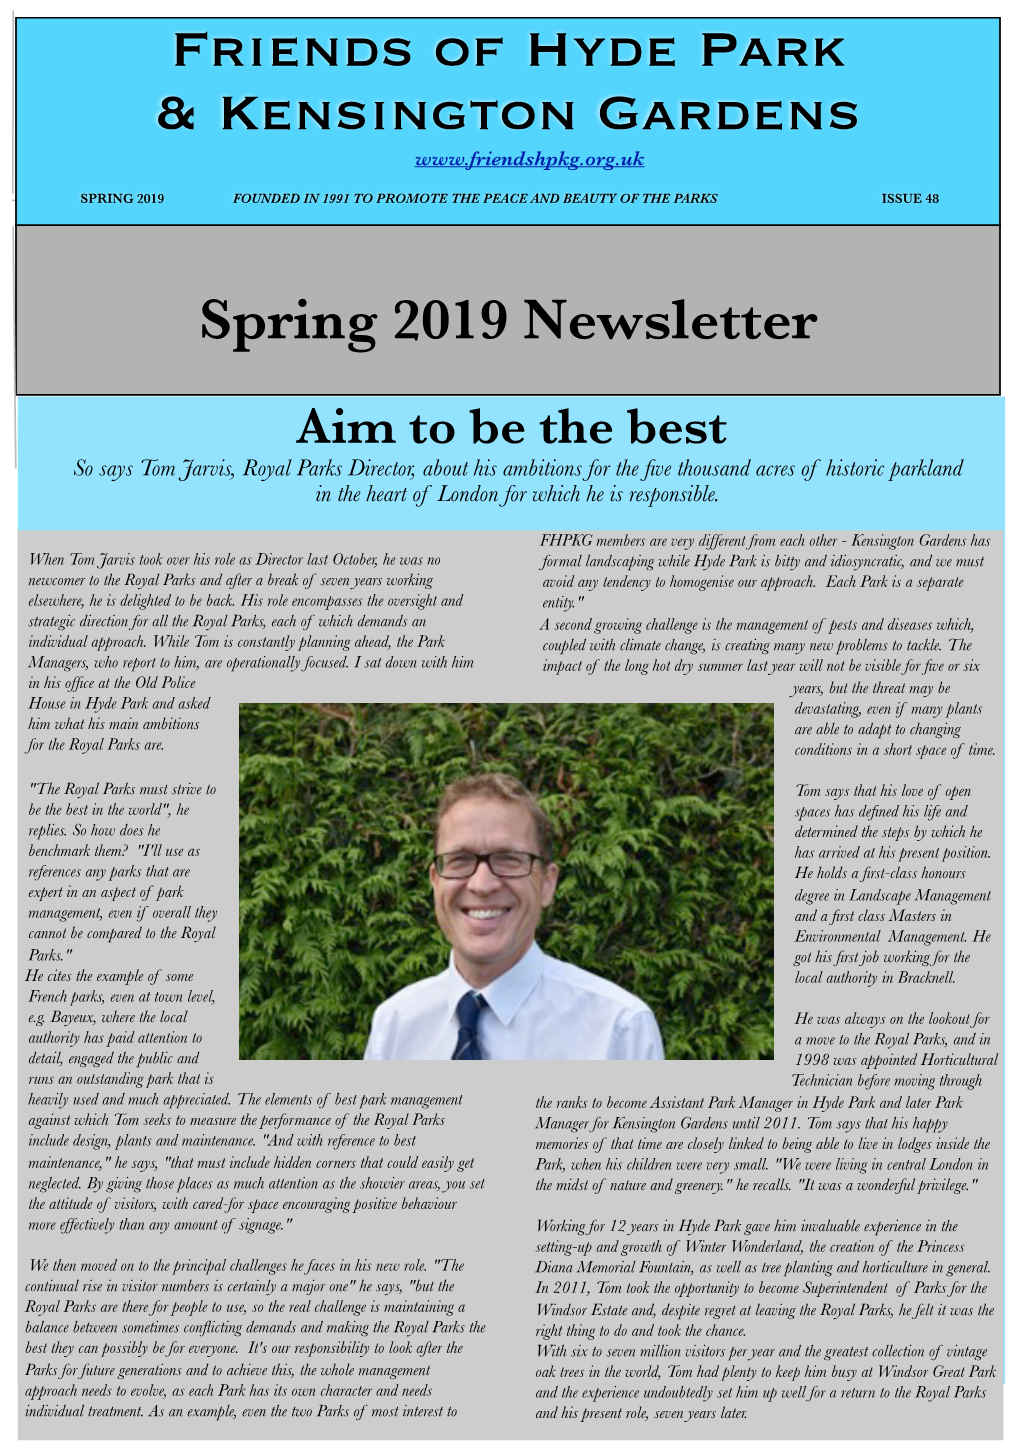 Spring 2019 Founded in 1991 to Promote the Peace and Beauty of the Parks Issue 48